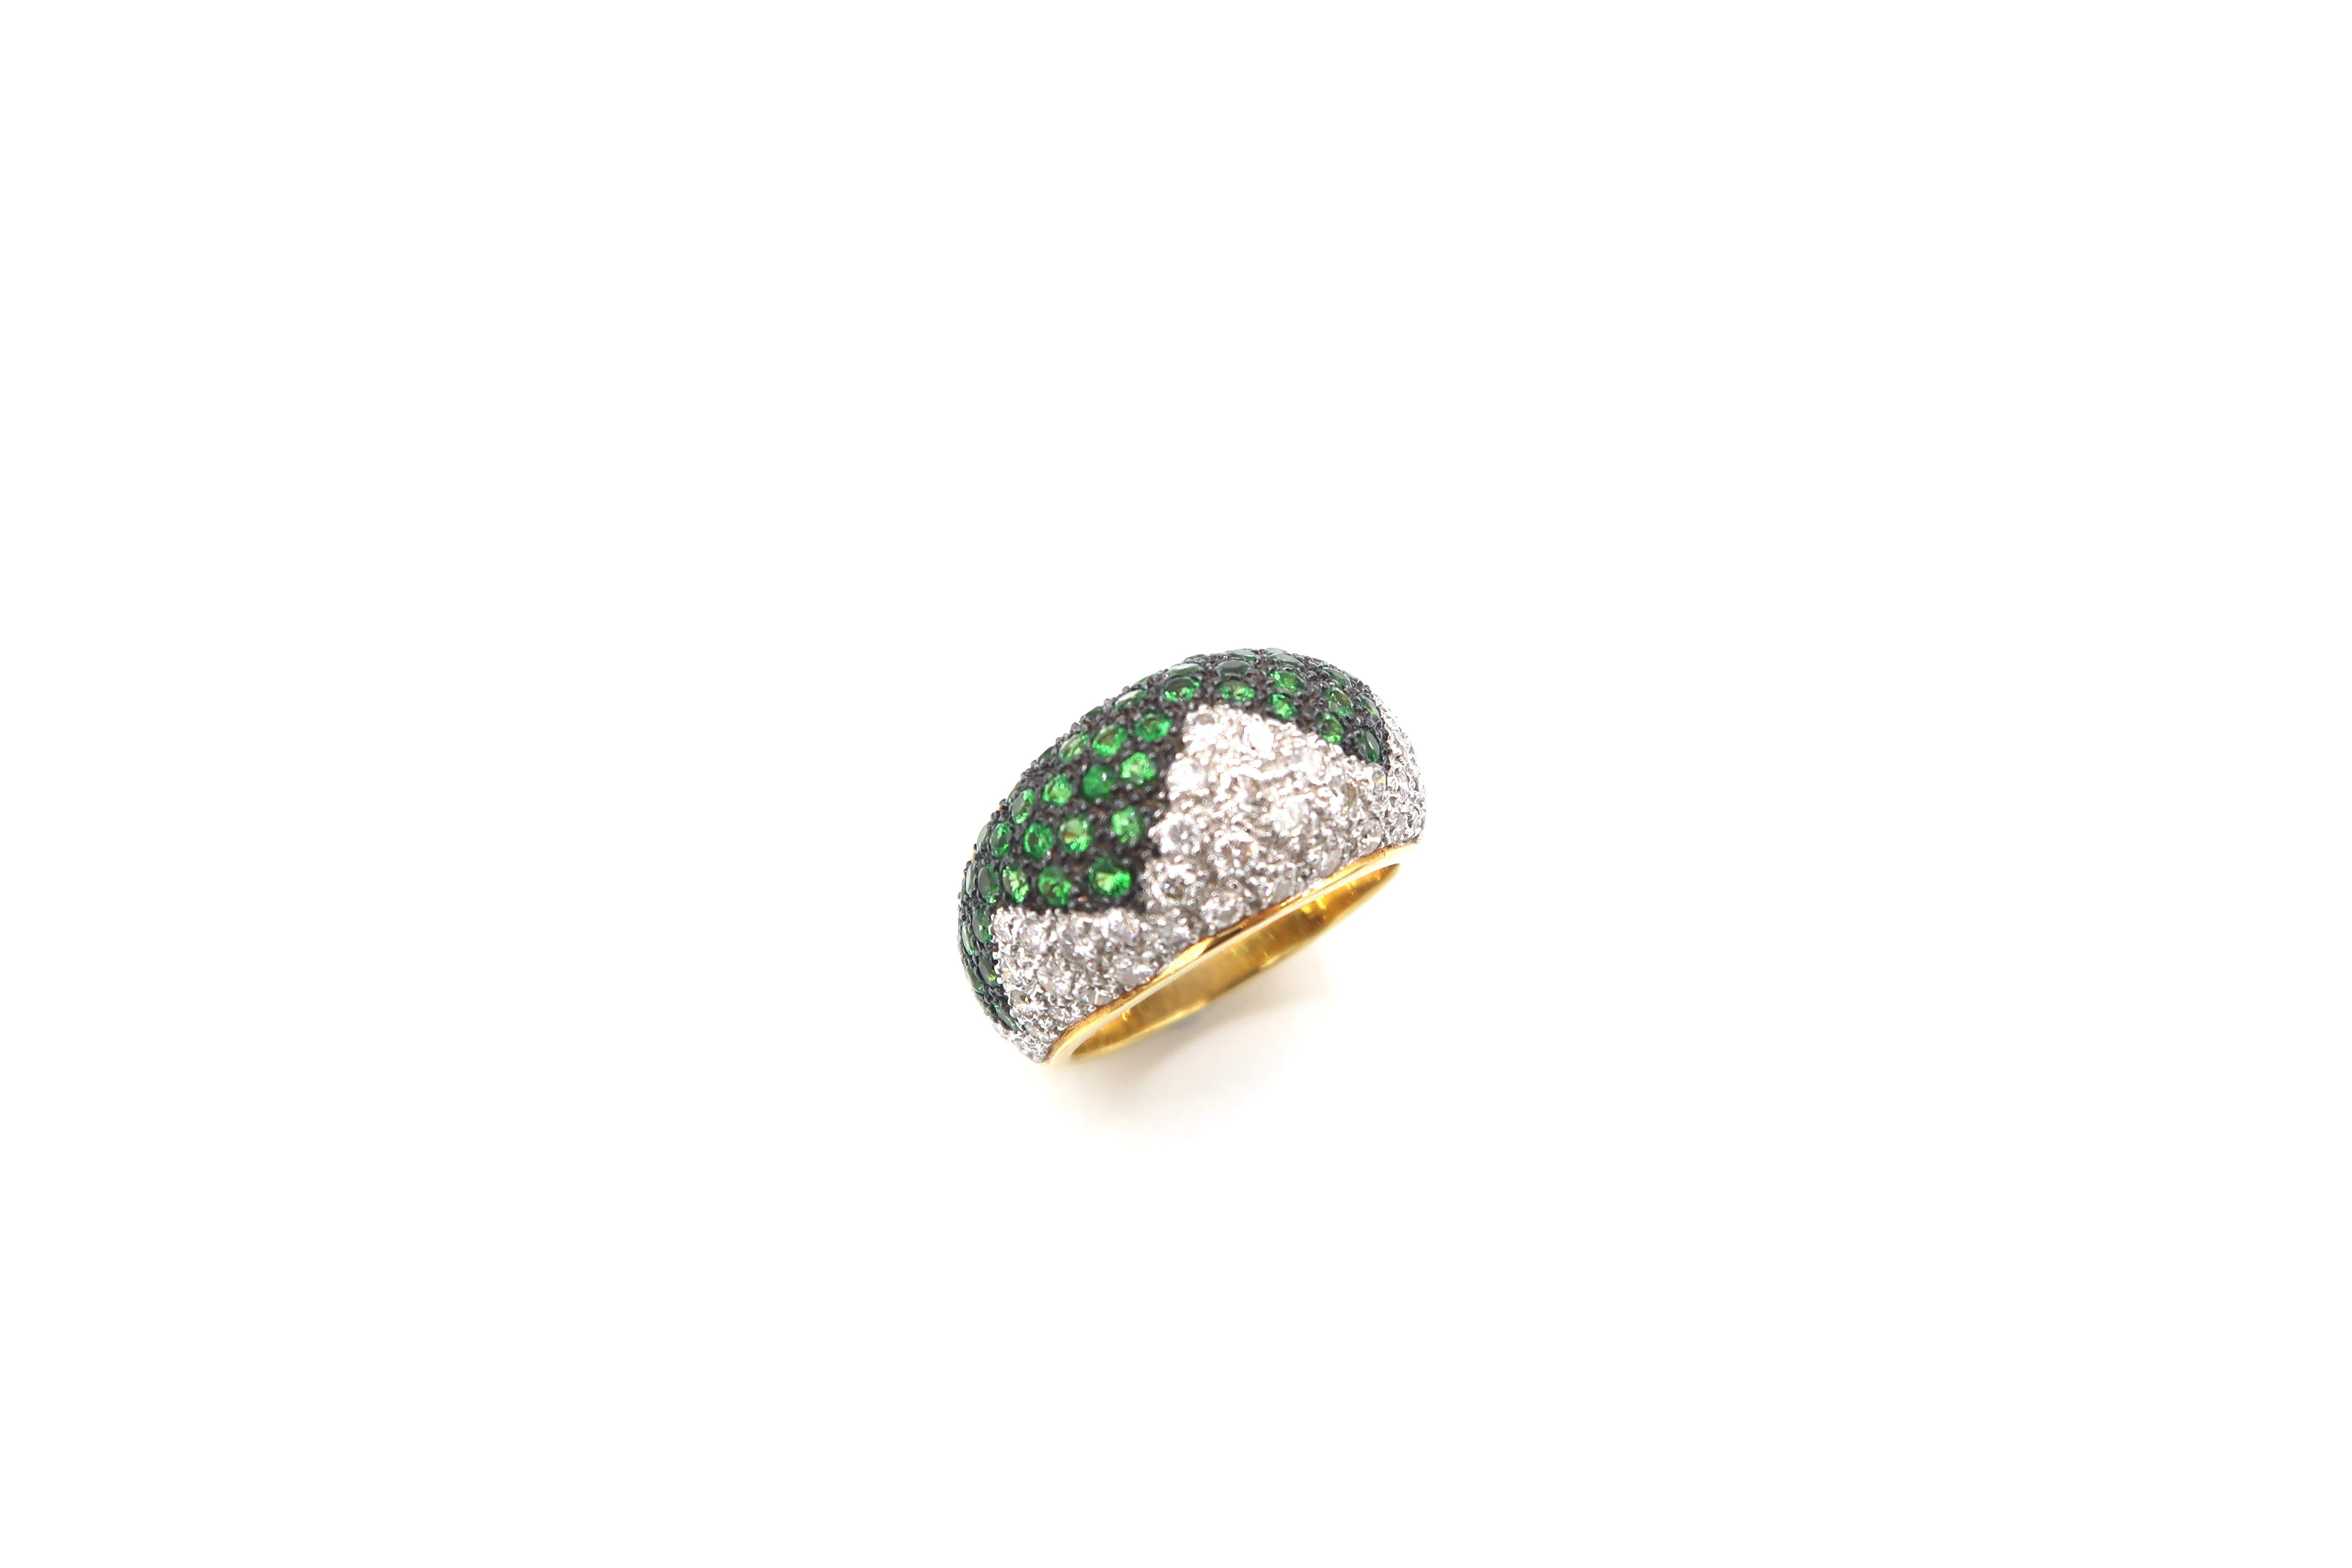 Convex Zigzag-Lined Tsavorite and Diamond Pavé Ring in 18K Gold

Complimentary Resizing Service

Ring Size: UK M, 53, US 6 1/2

Diamond: 0.70ct.
Tsavorite: 1.11ct.
Gold: 18K Gold 18.959g.